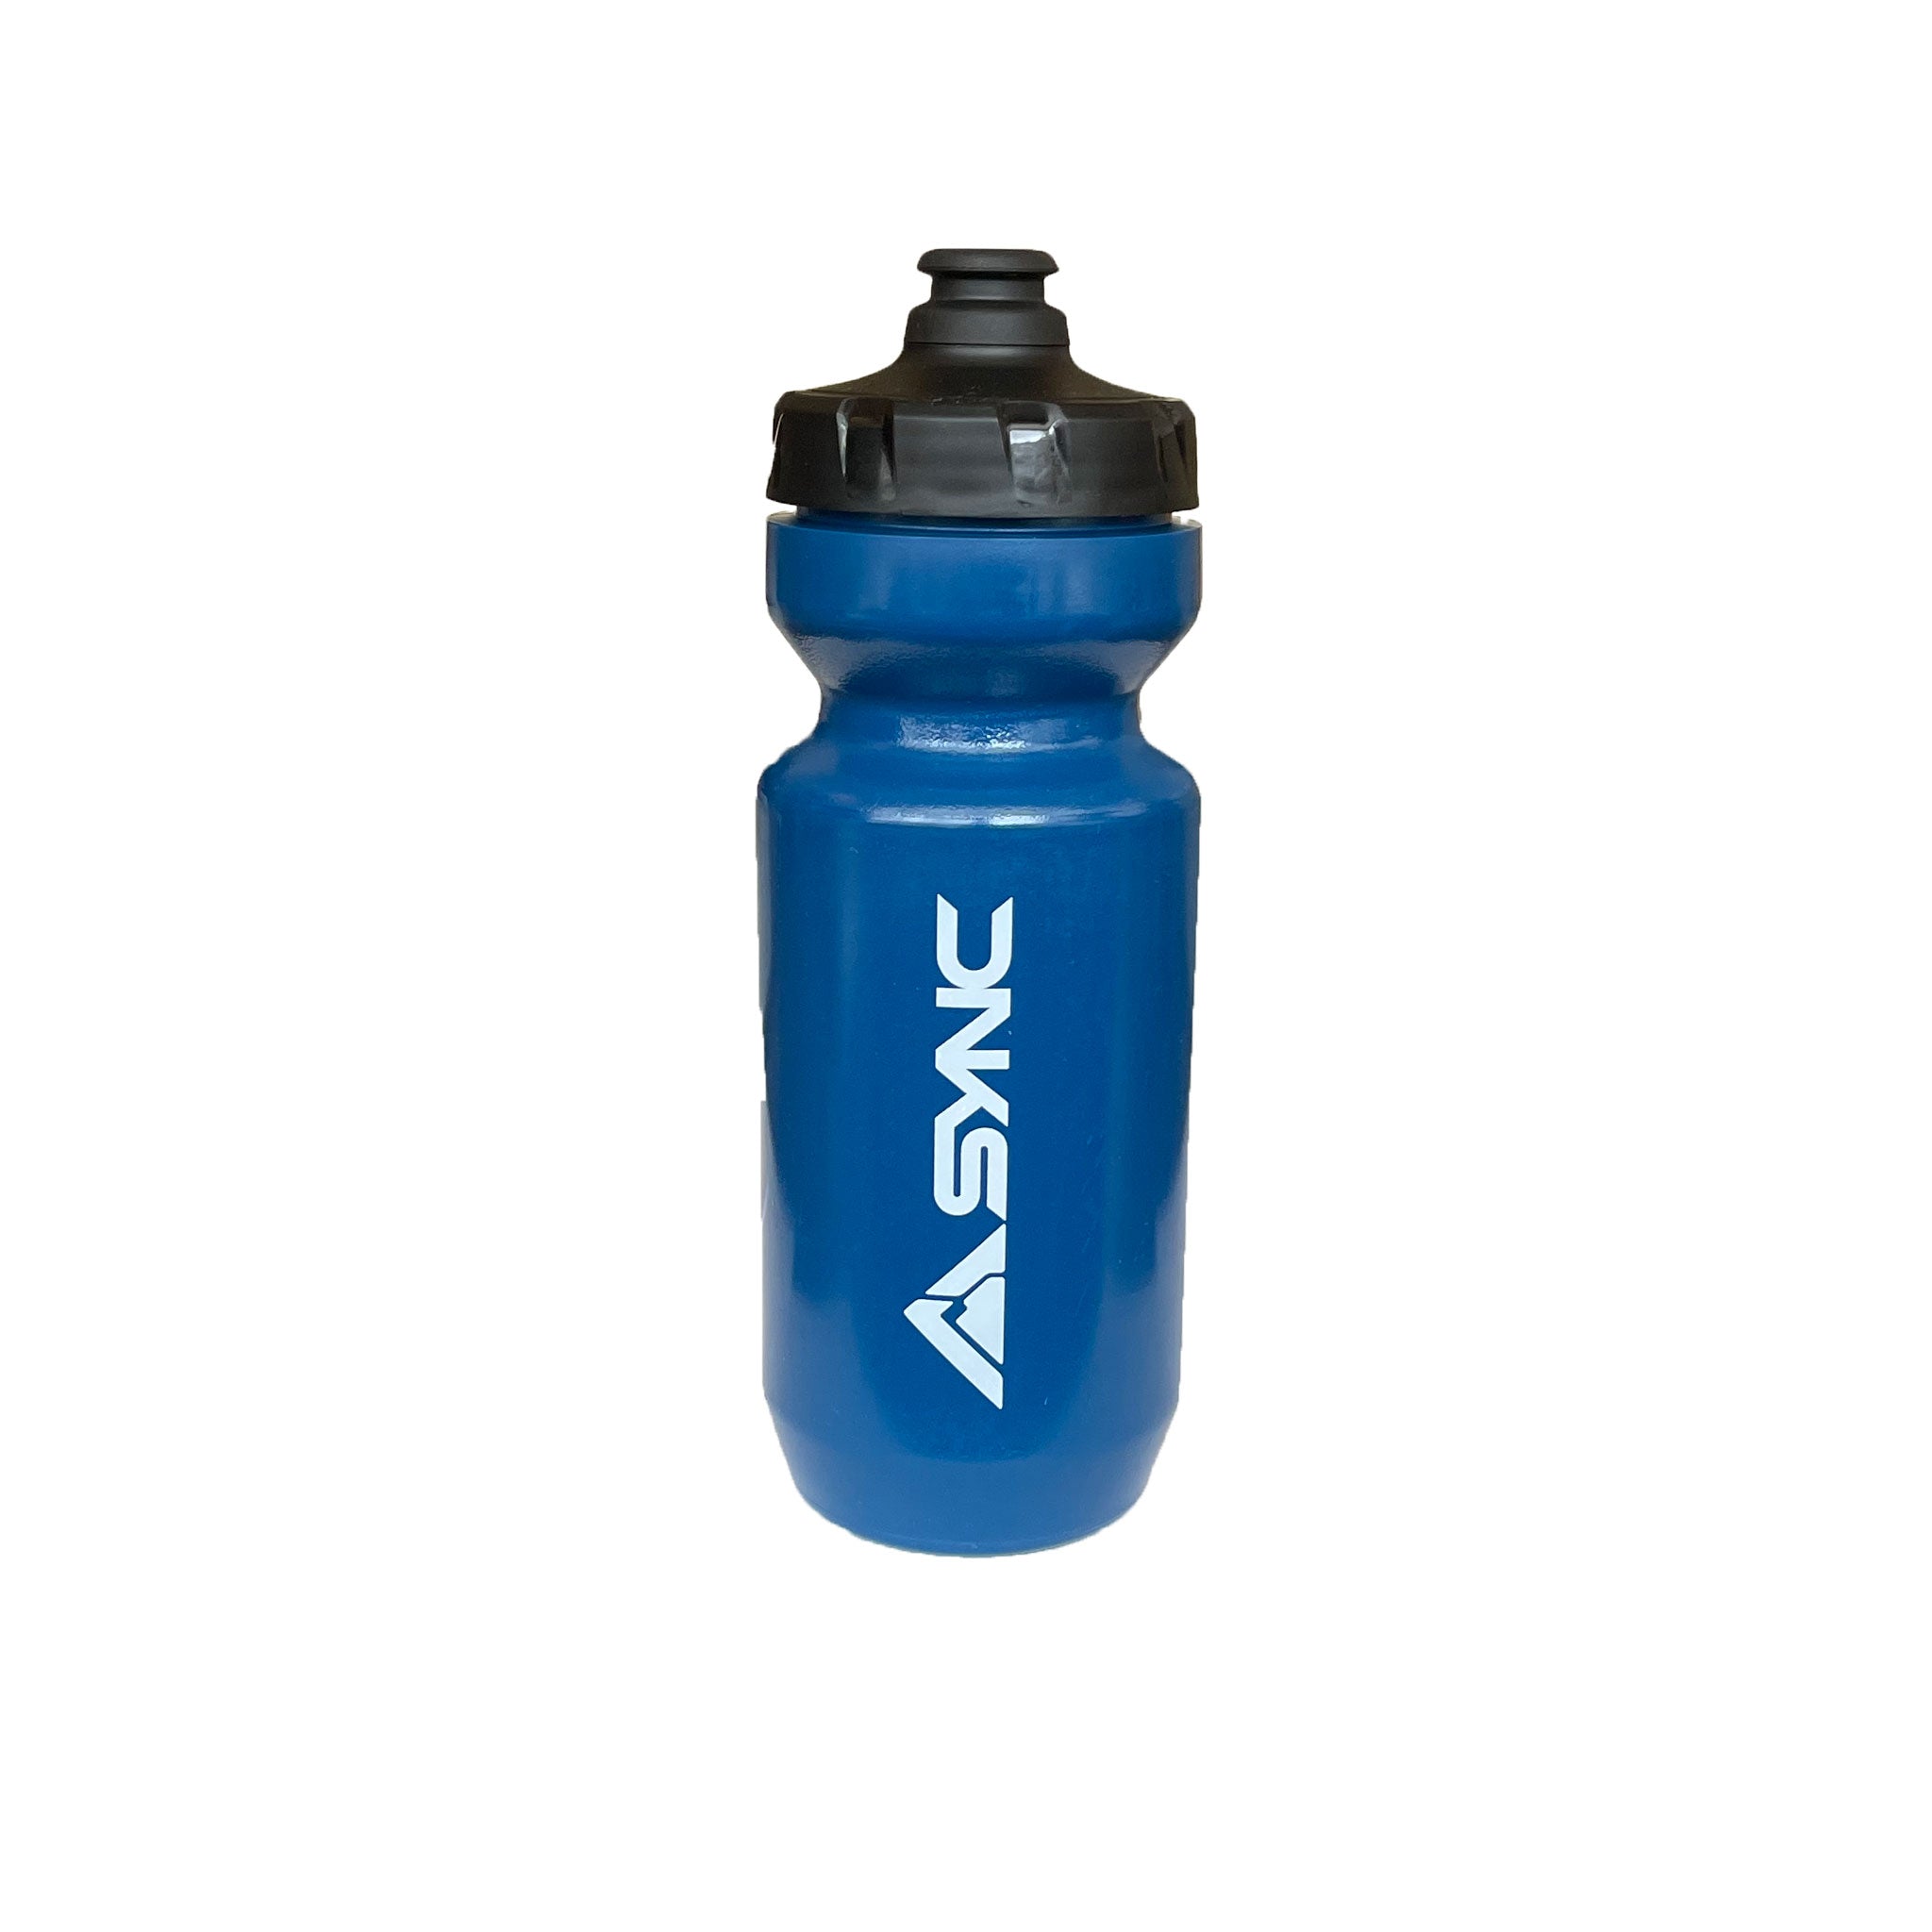 sync-performance-water-bottle-navy-blue